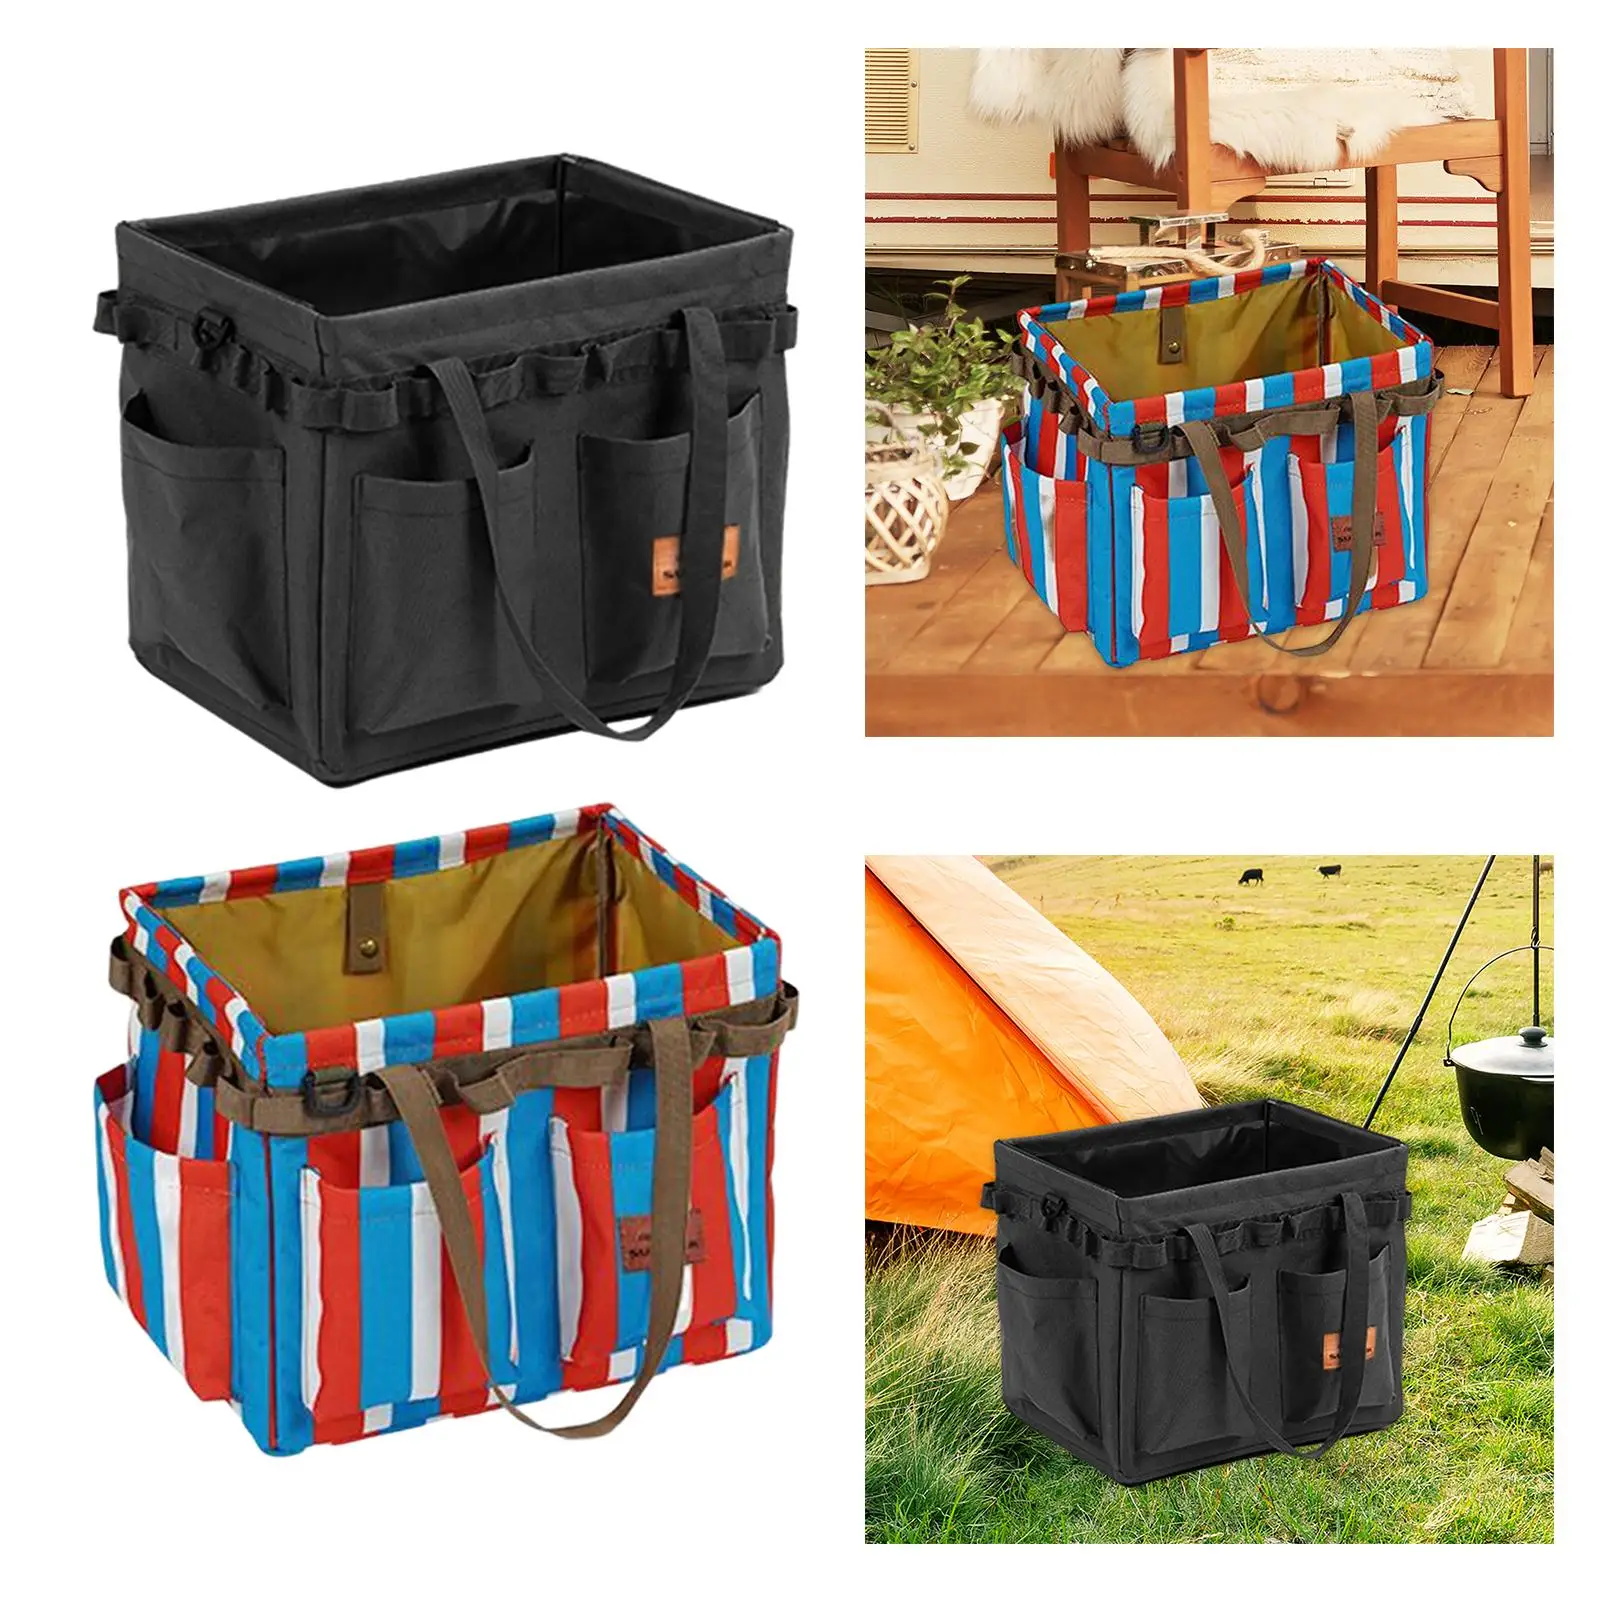 Utility Tote Tool Organizer Picnic with Handle Fishing Camping Storage Bag